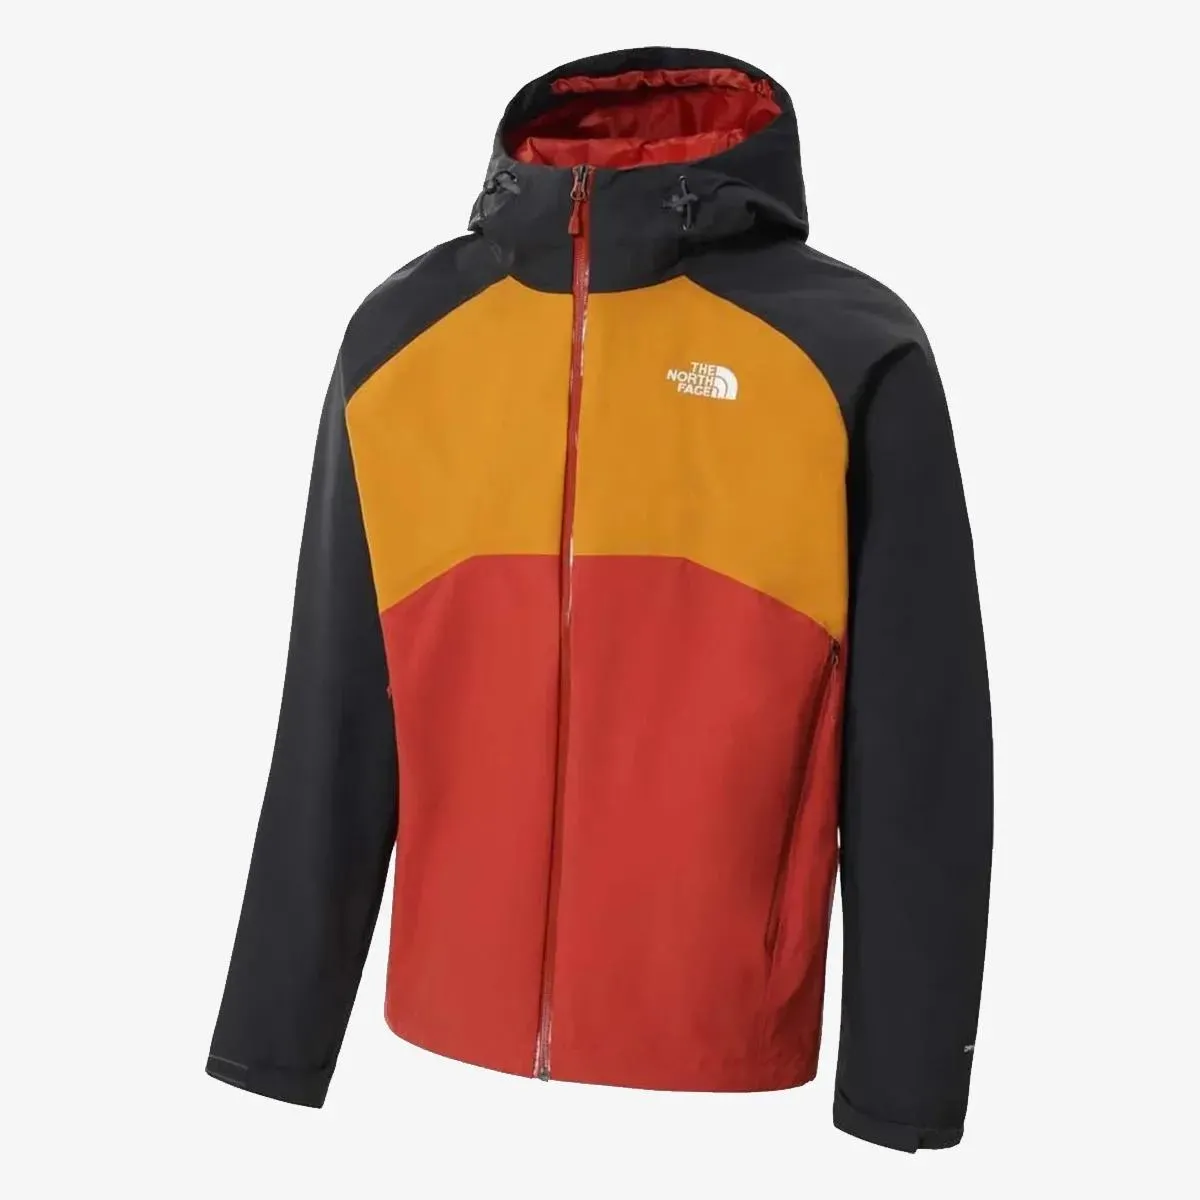 The North Face Jakna M STRATOS JACKET TDSPR/CRNY/ASGY 